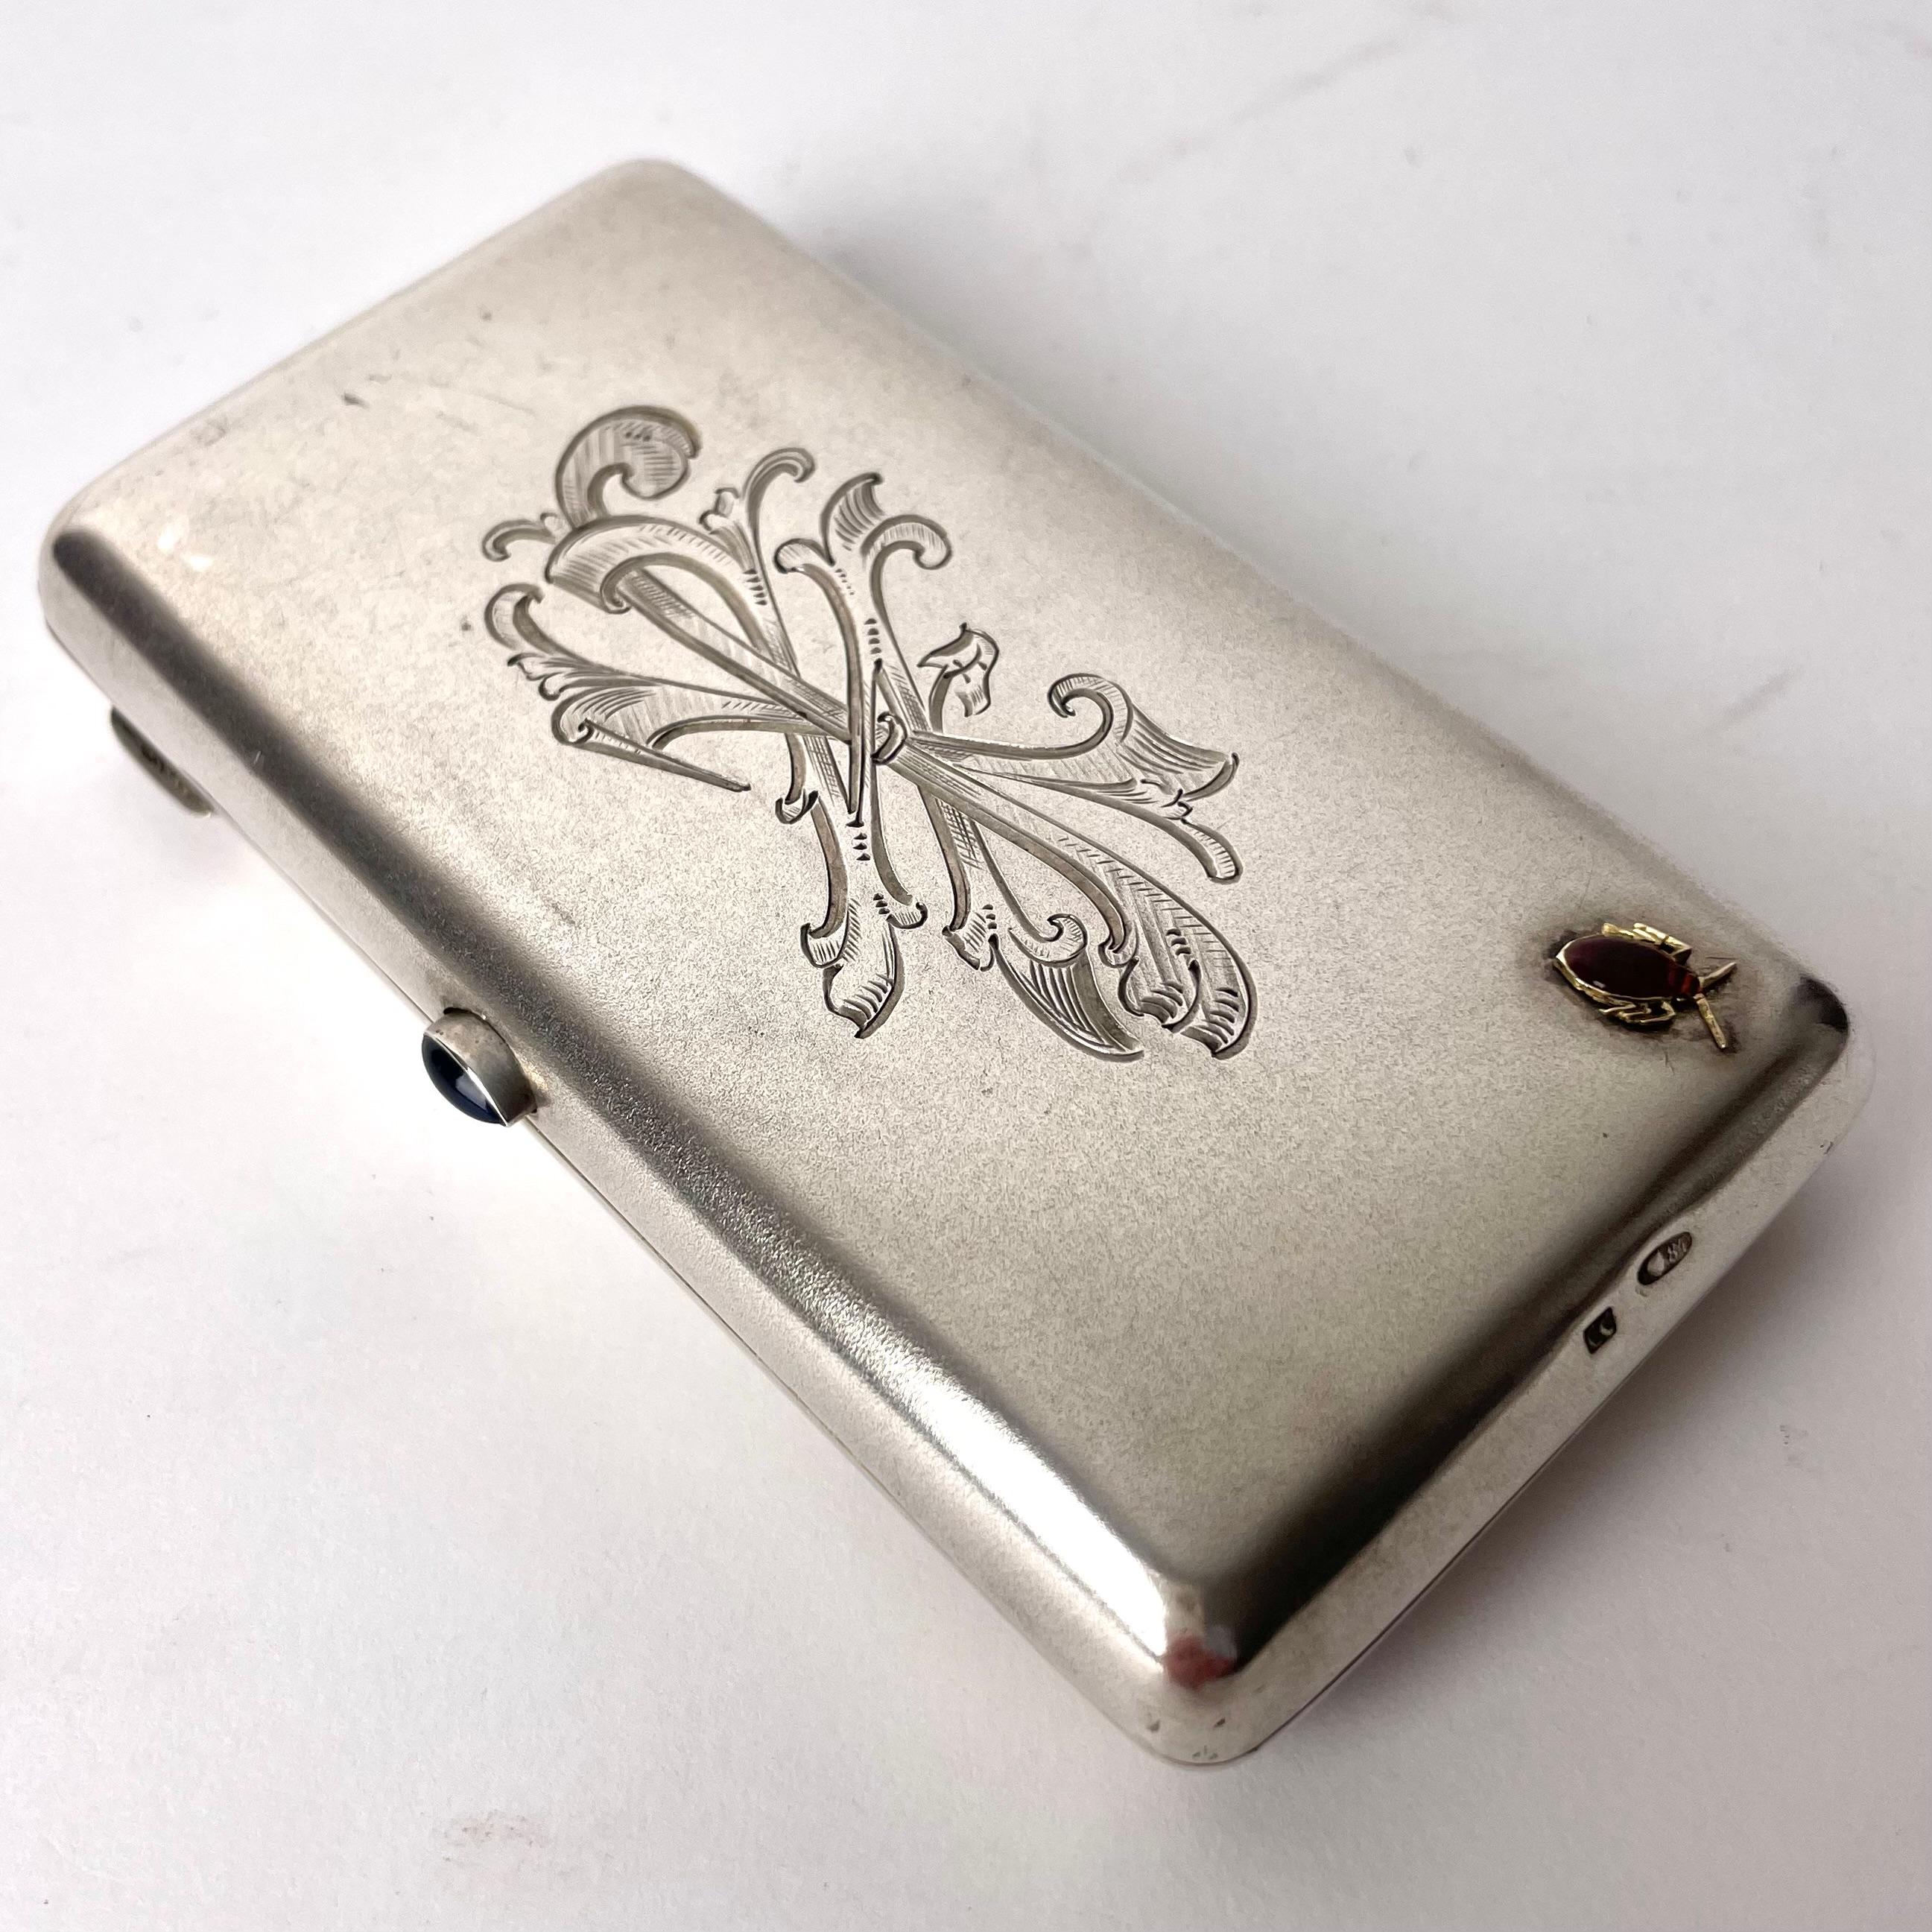 Refined Cigarette Etui in Silver, 1908-1926, Made in Moscow, Russia.

A beautiful case for cigarettes of Russian origin. Adorned with a series of stylized and elegant flowing interlocking ornaments, etched into the silver. The decor is of a quite